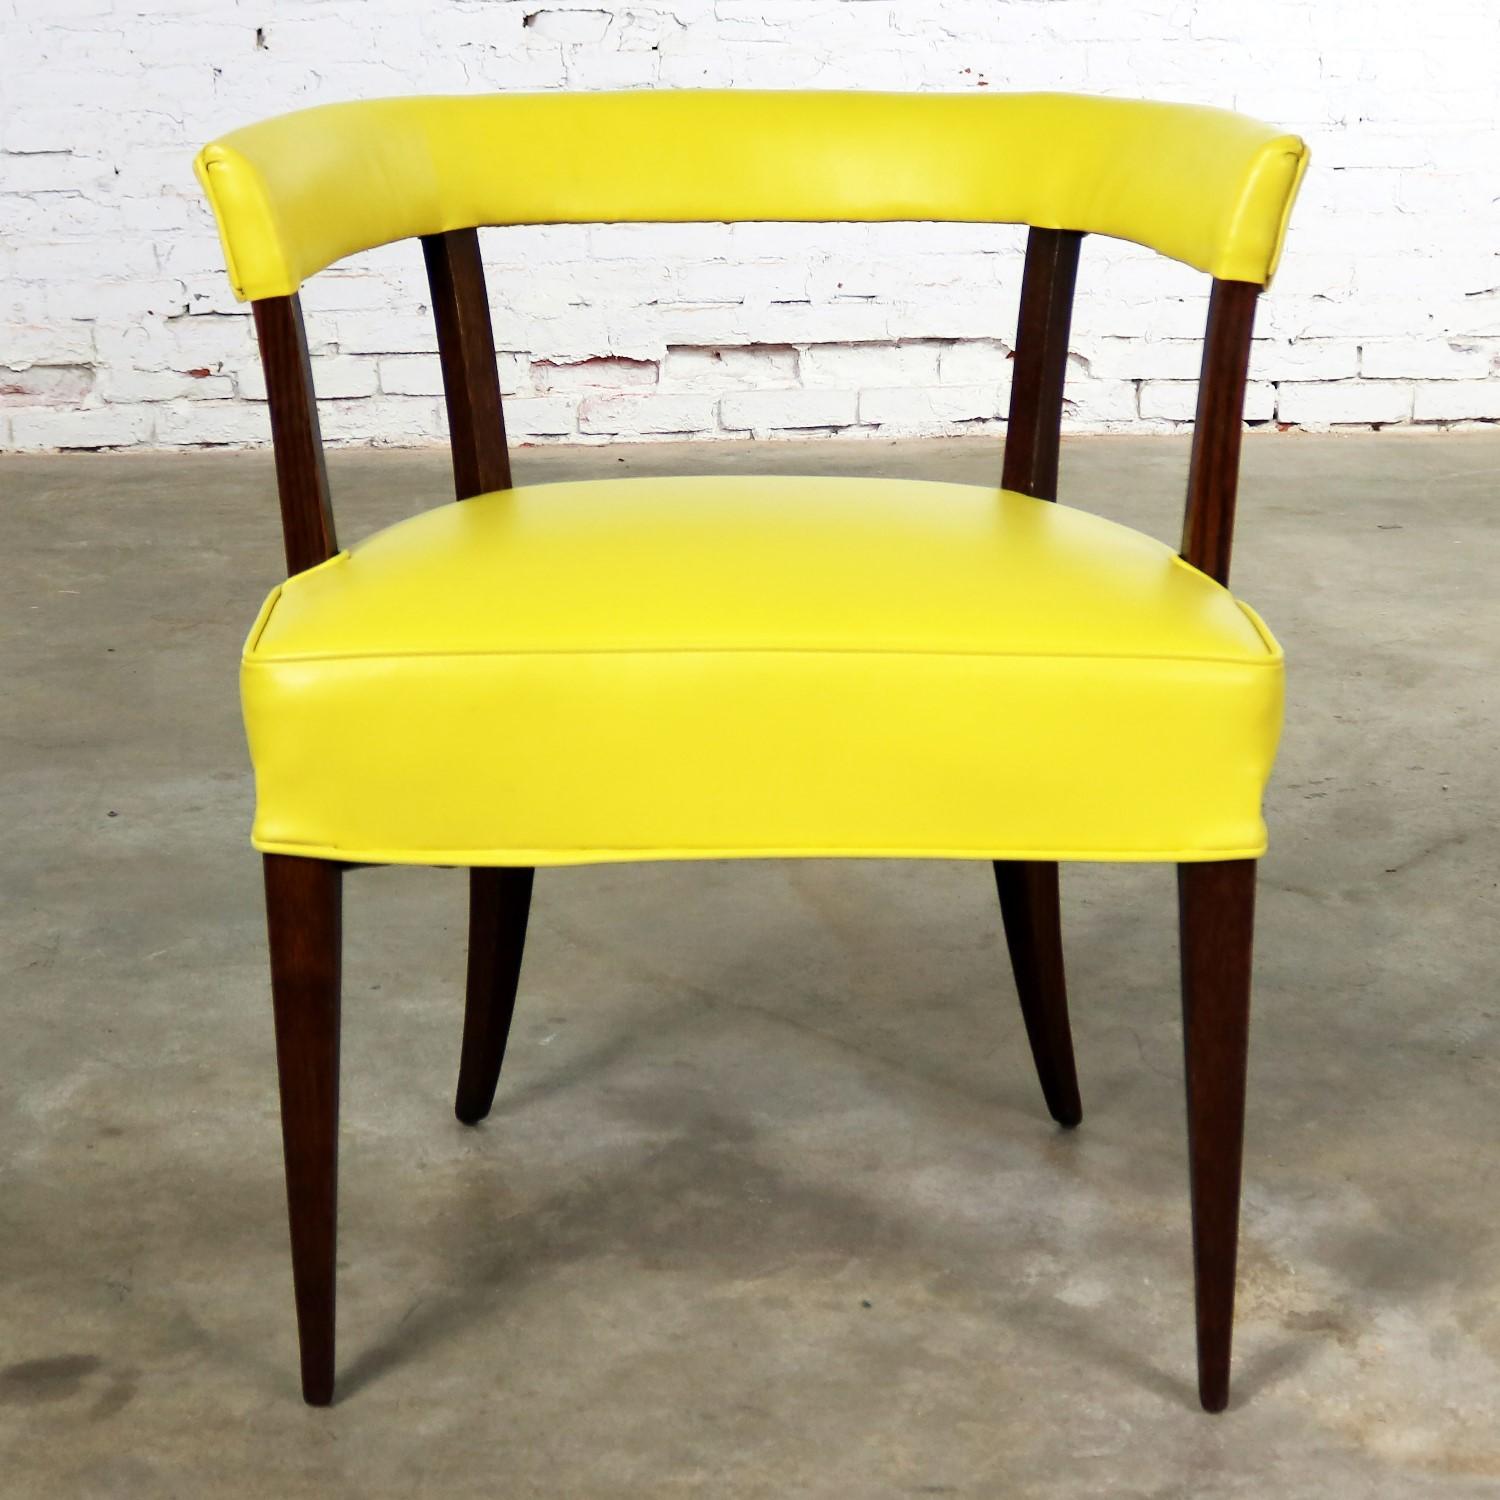 Awesome Mid-Century Modern rosewood stained oak barrel back side chair with its original lemon-yellow vinyl upholstery. It is in fabulous vintage condition with normal wear and tear and no outstanding flaws, circa 1950s.

This is a he said she